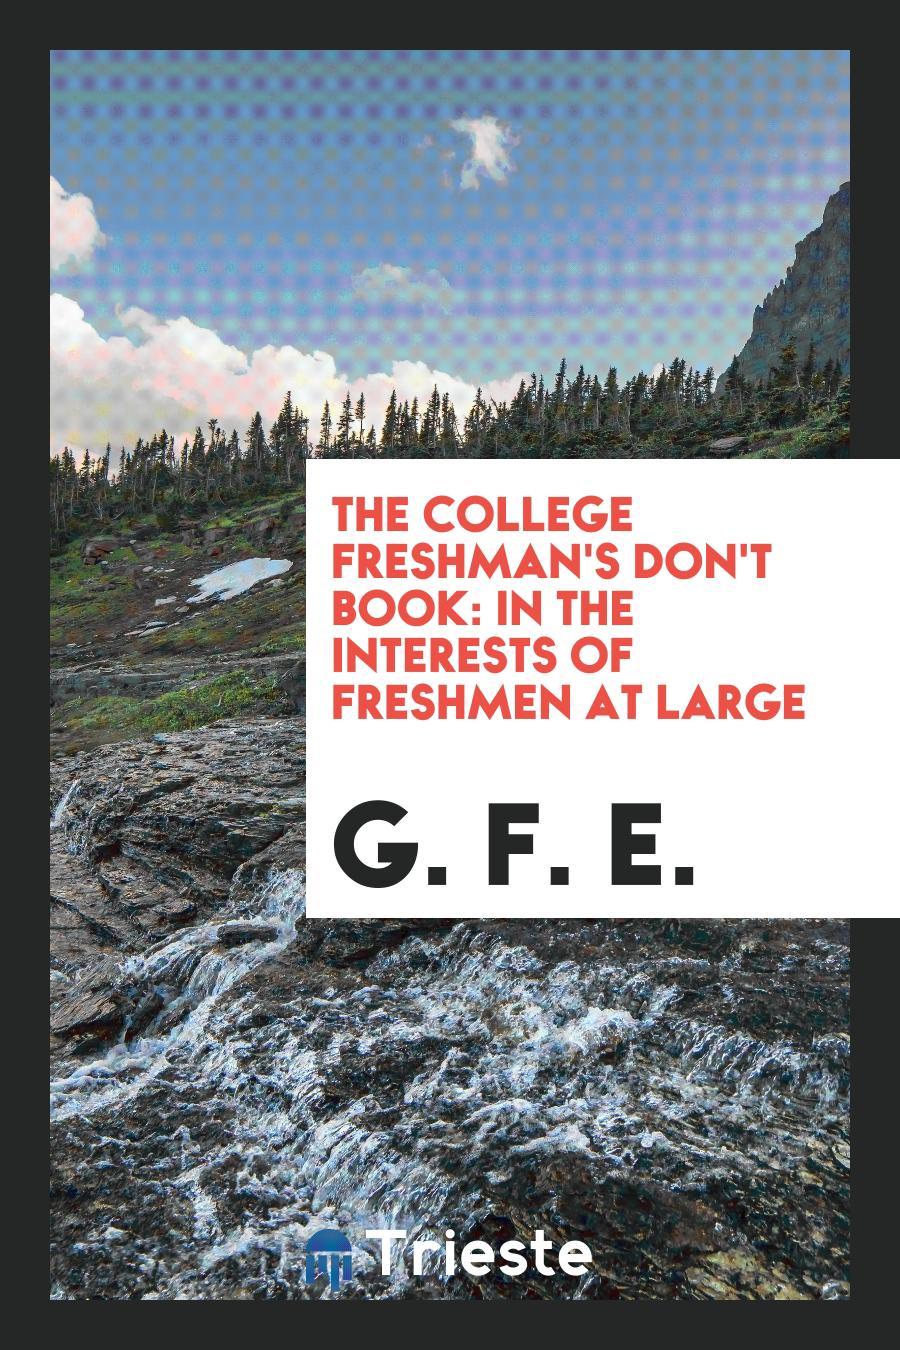 The College Freshman's Don't Book: In the Interests of Freshmen at Large